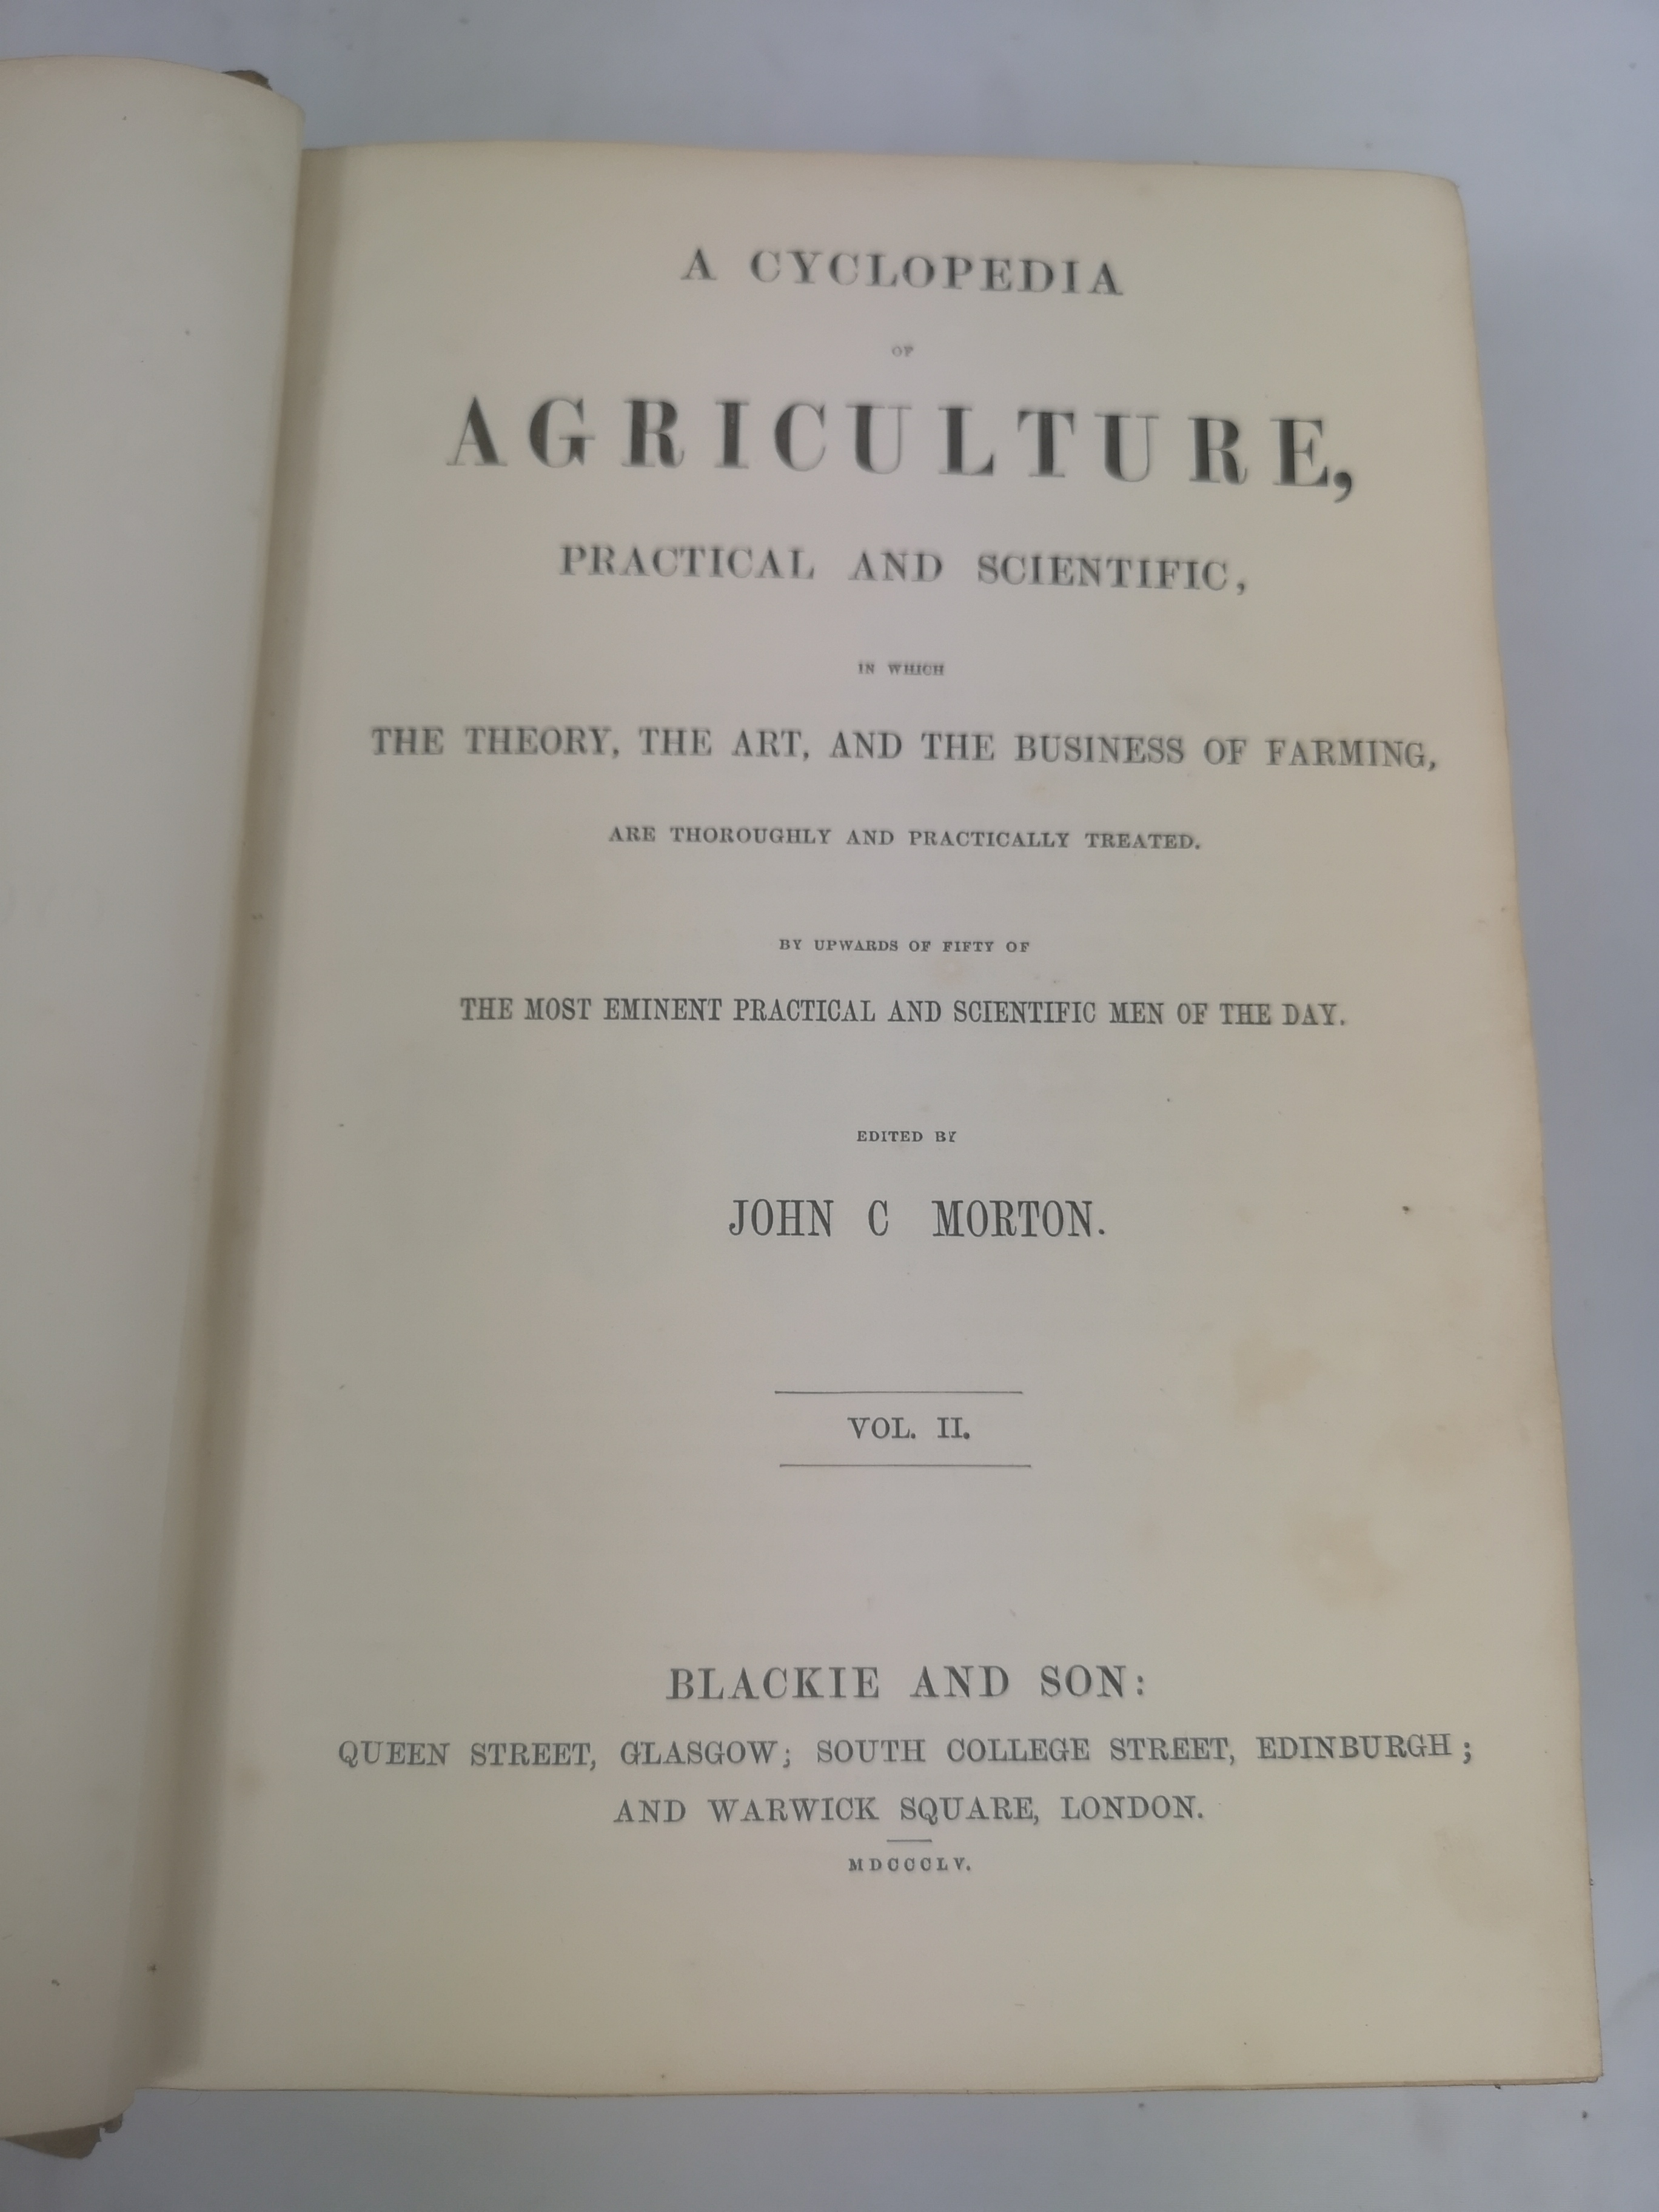 A Cyclopedia of Agriculture edited by John Moreton - Image 4 of 6